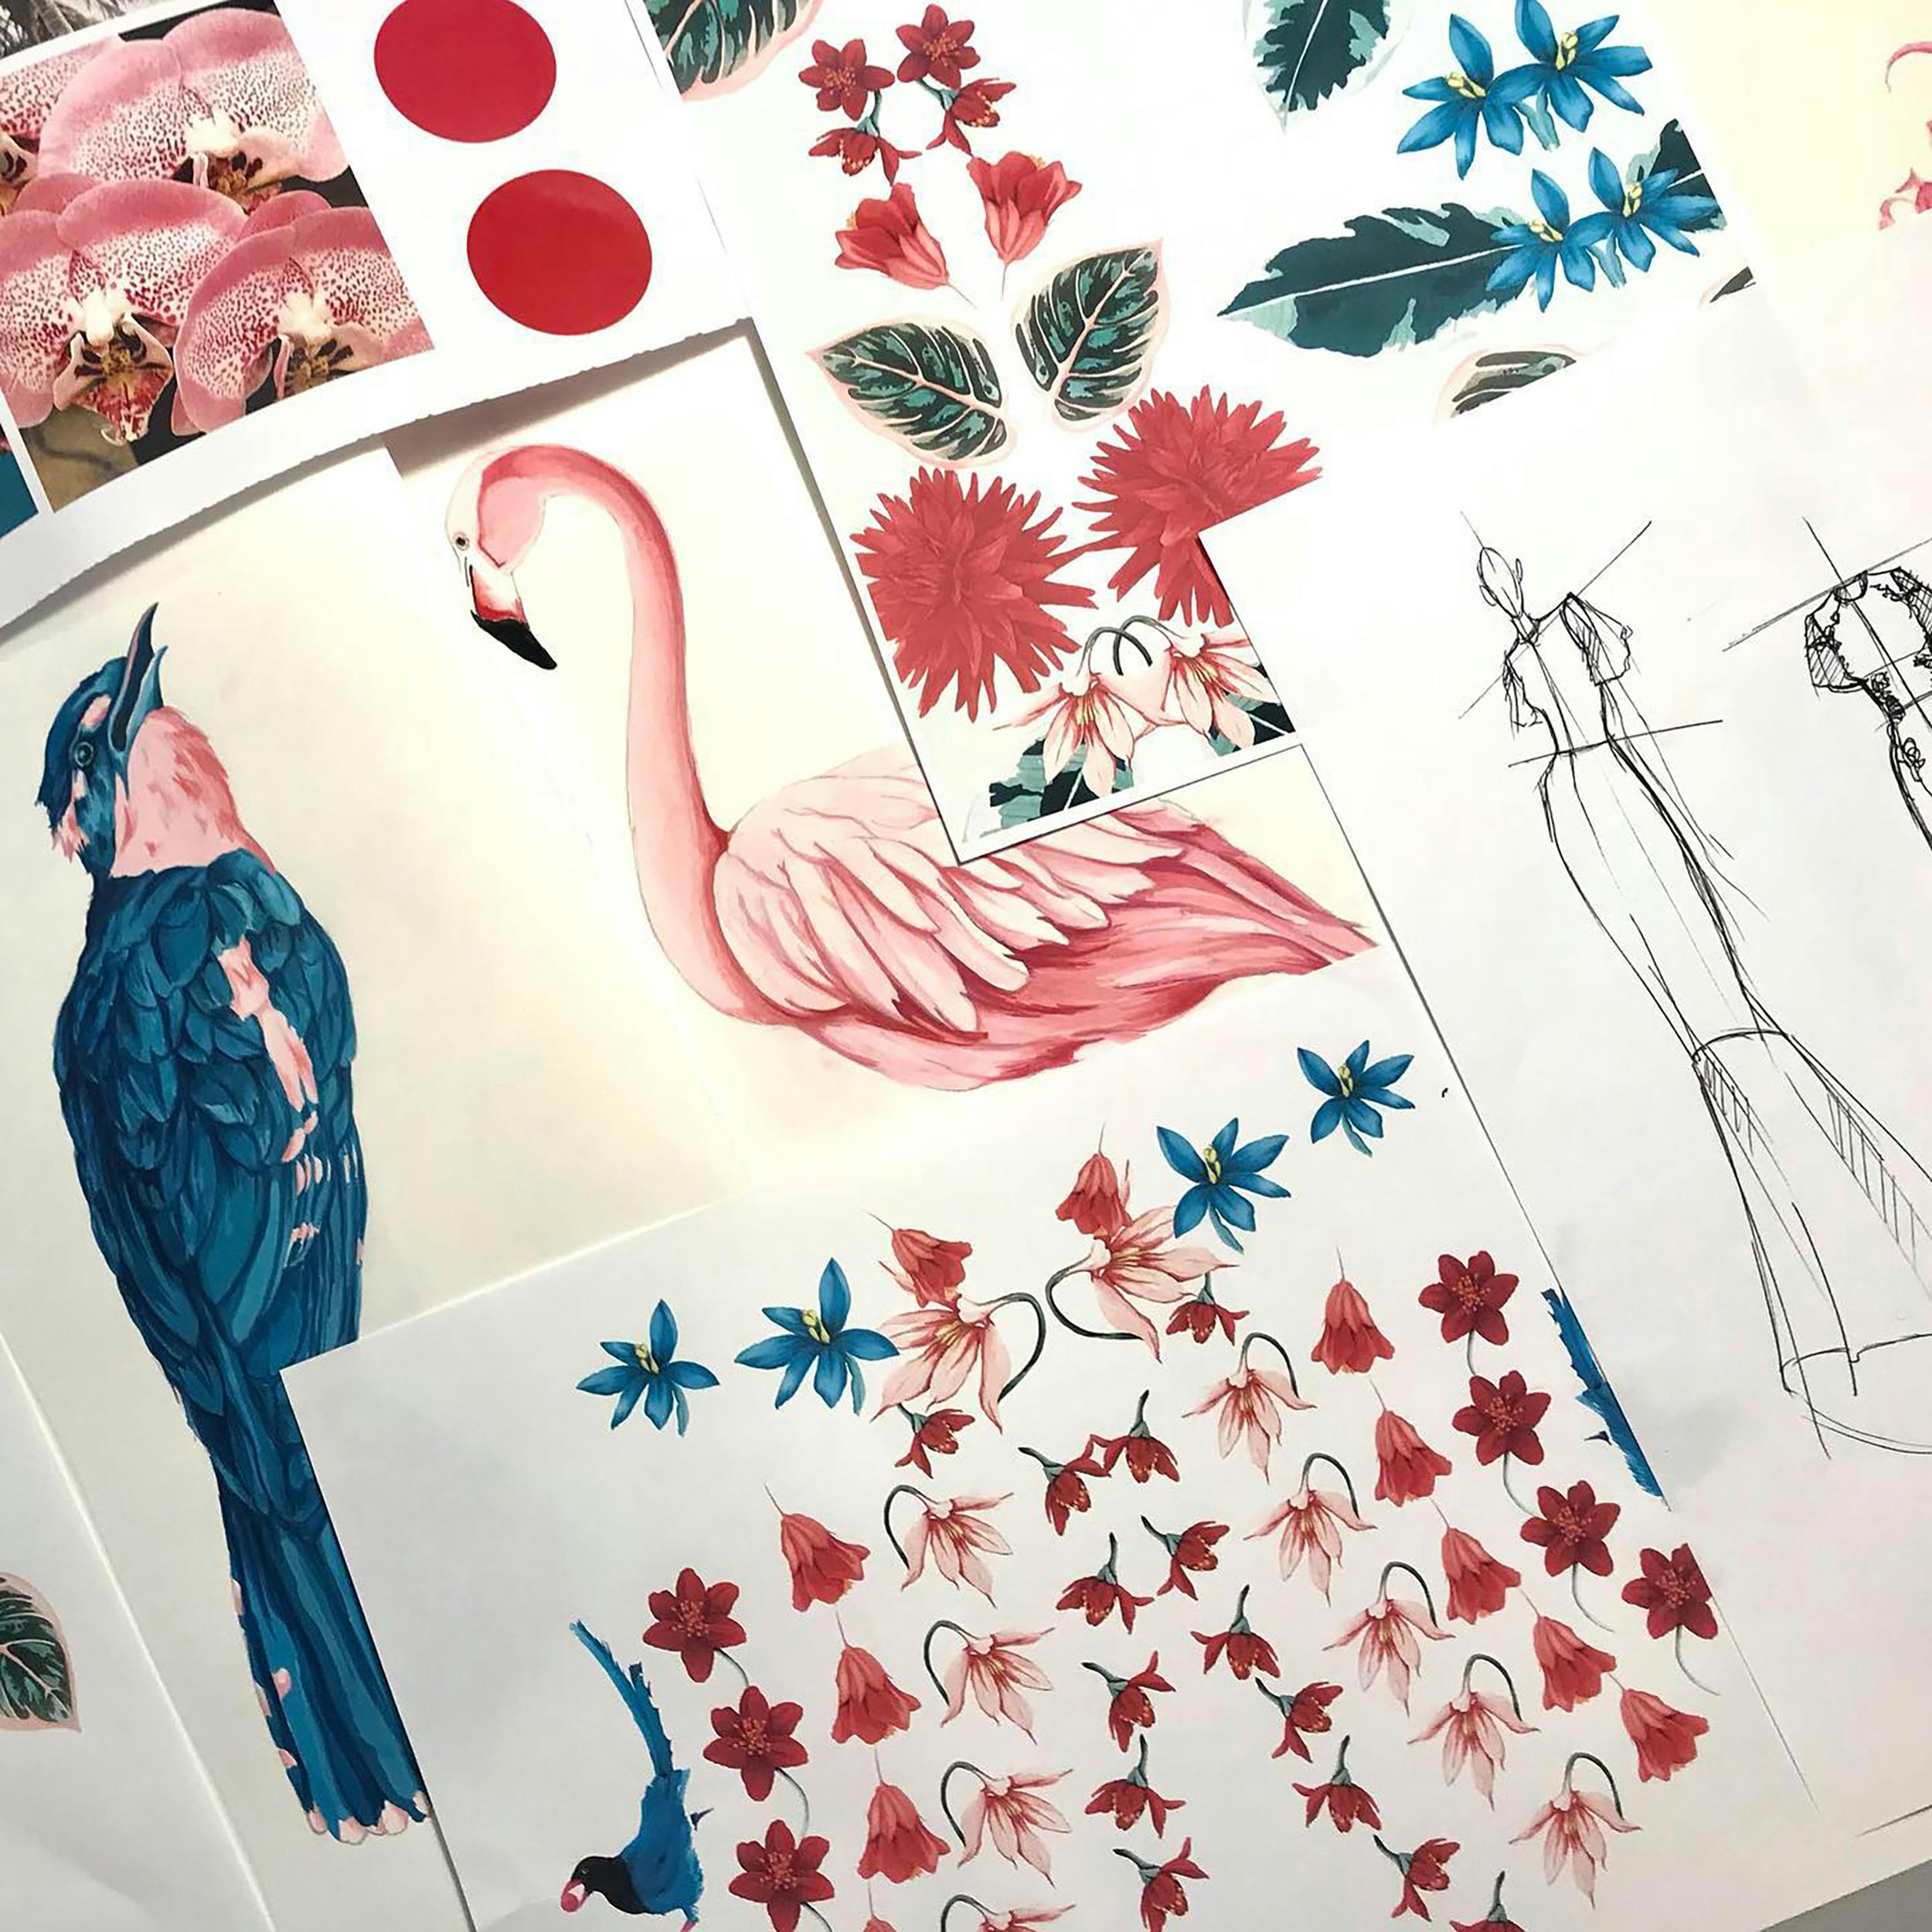 Katie Furzer's work featuring sketches and illustrations of birds such as a flamingo and design elements